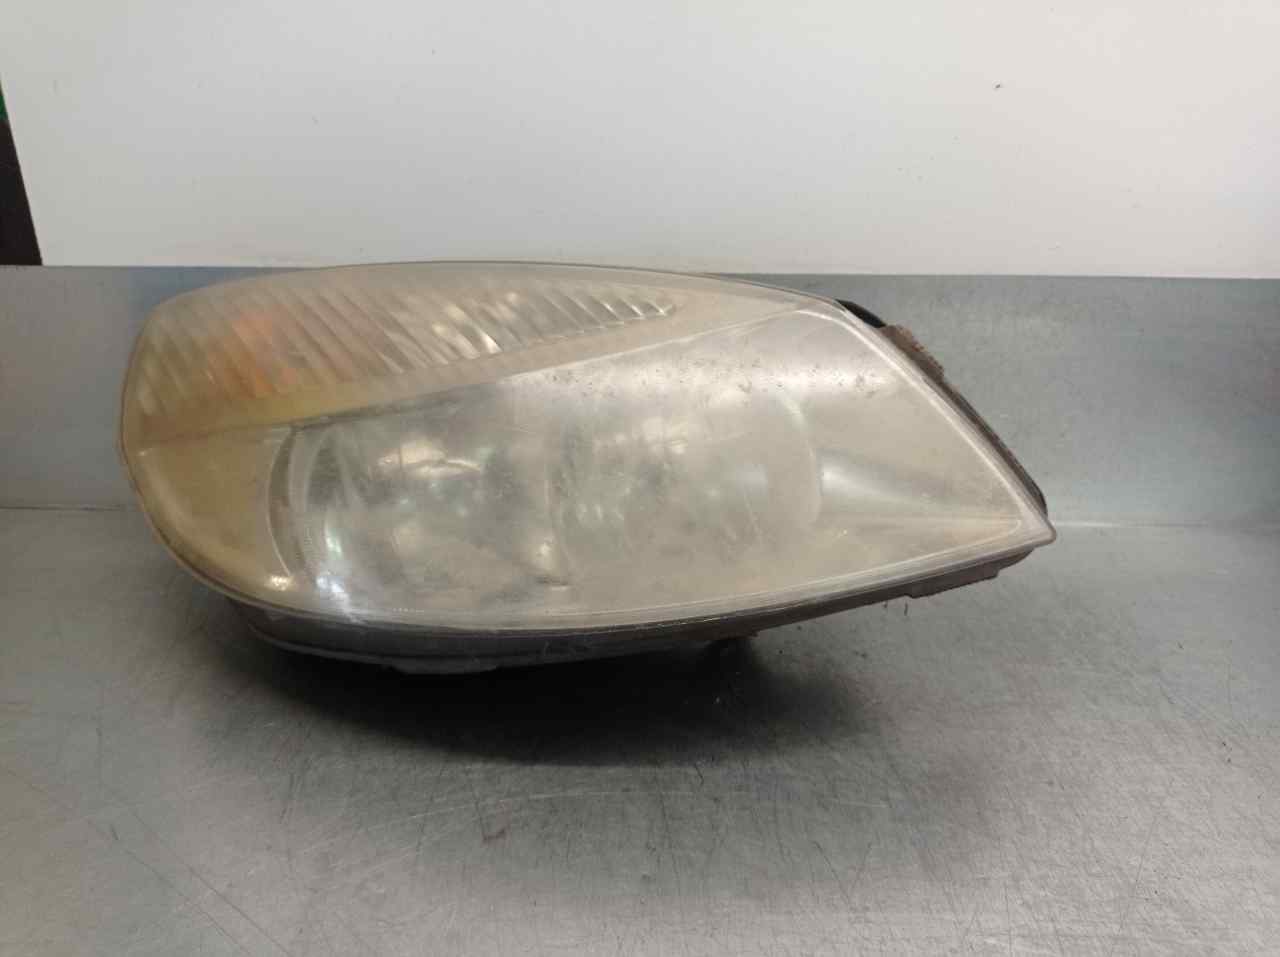 RENAULT Scenic 2 generation (2003-2010) Front Right Headlight 15810400RE, 260102336R, 5PUERTAS 21726809